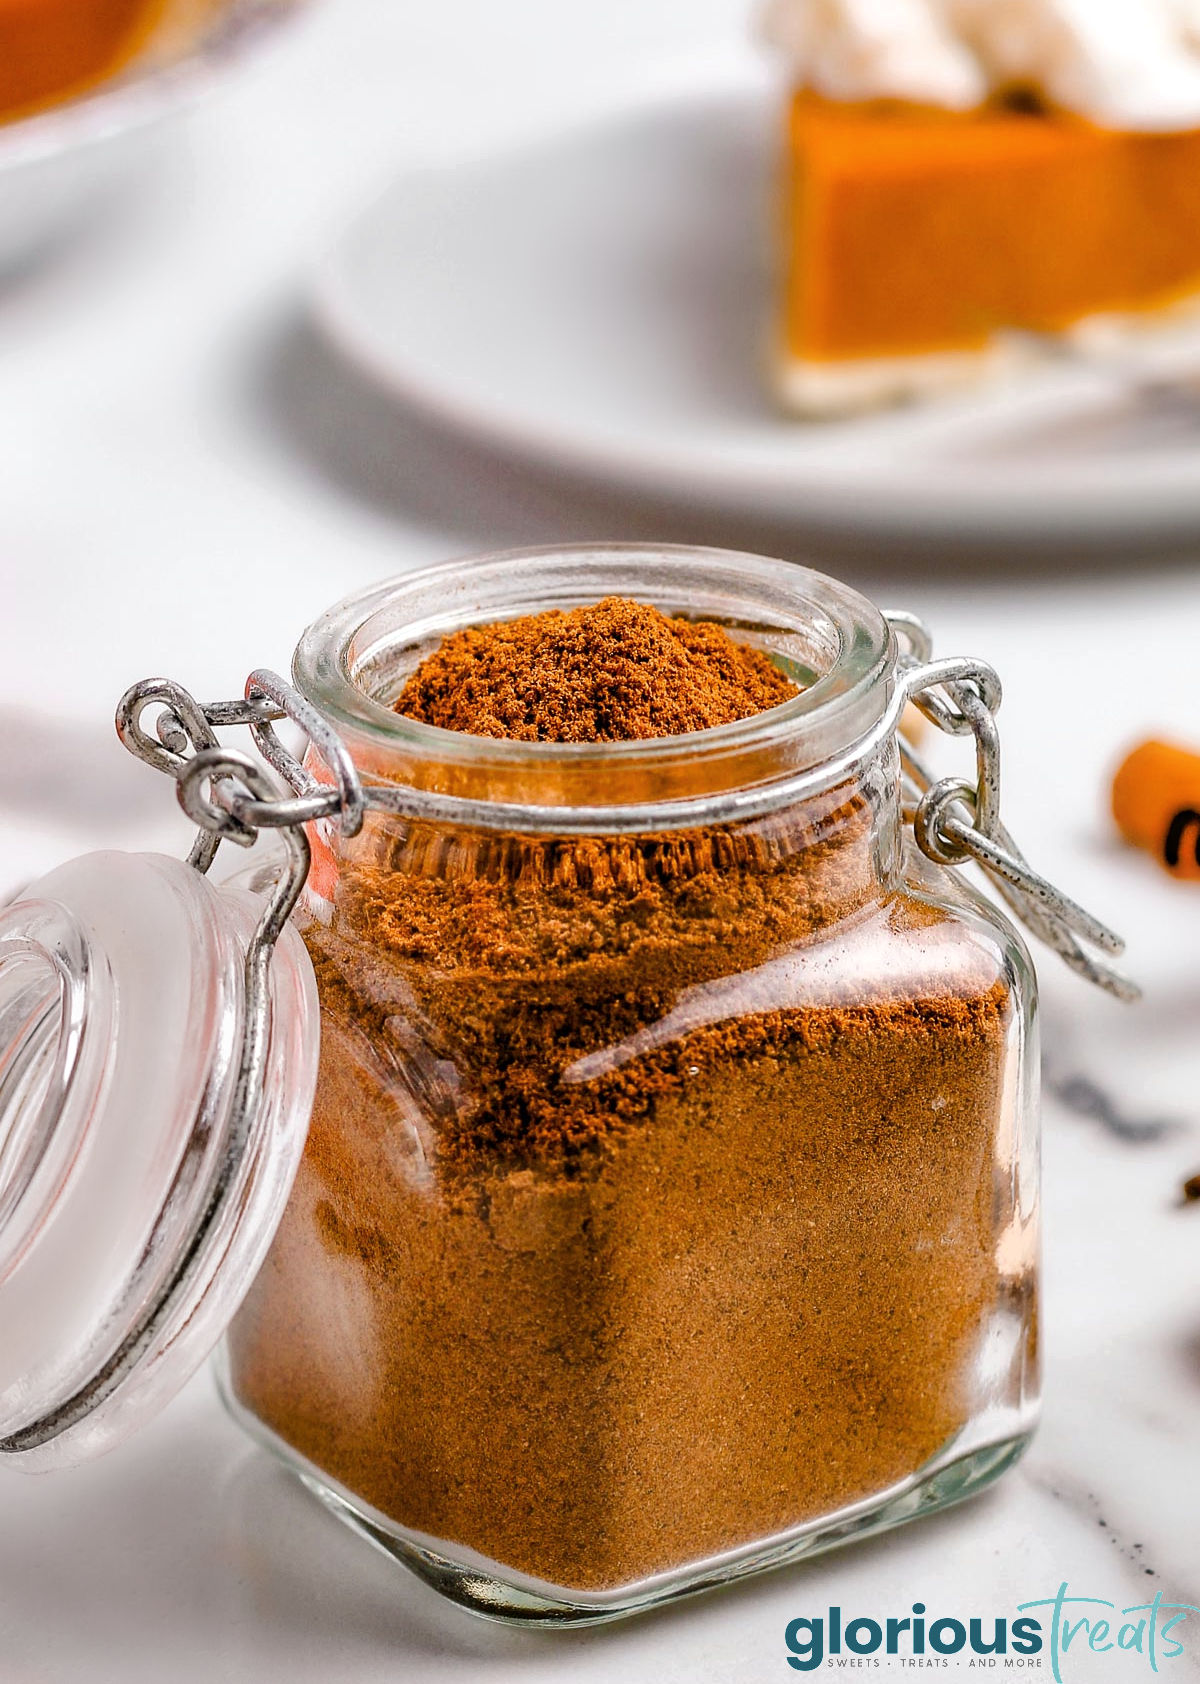 homemade pumpkin pie spice in small glass jar with hinged jar. whole nutmeg and cloves can be seen in the background.